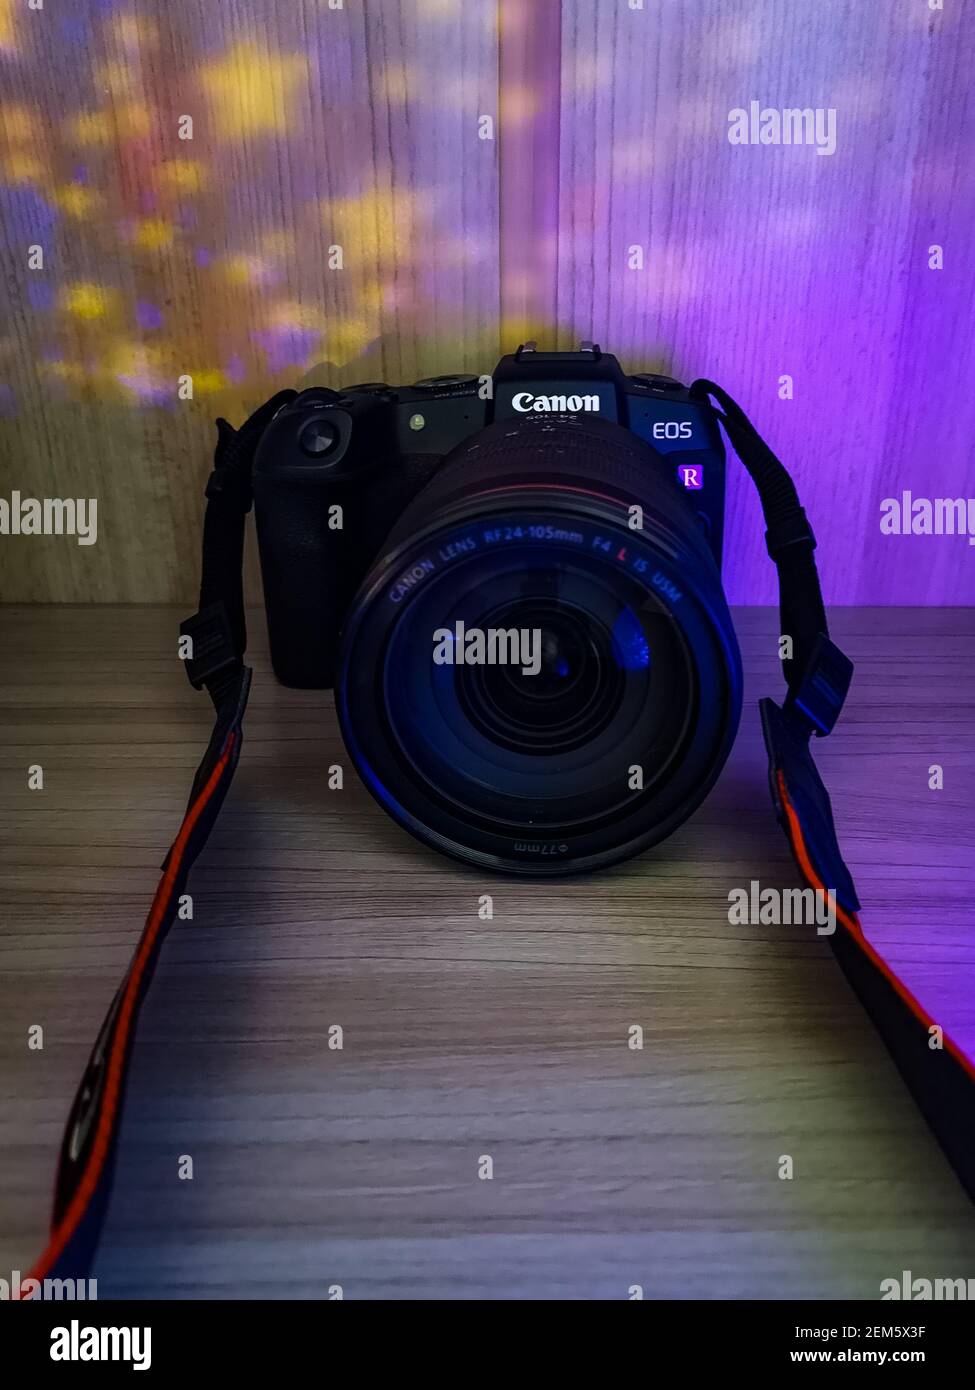 Wroclaw, Poland - April 28 2020: Canon RP camera with lens 24-105 f4 on wooden board highlighted with colorful lights Stock Photo